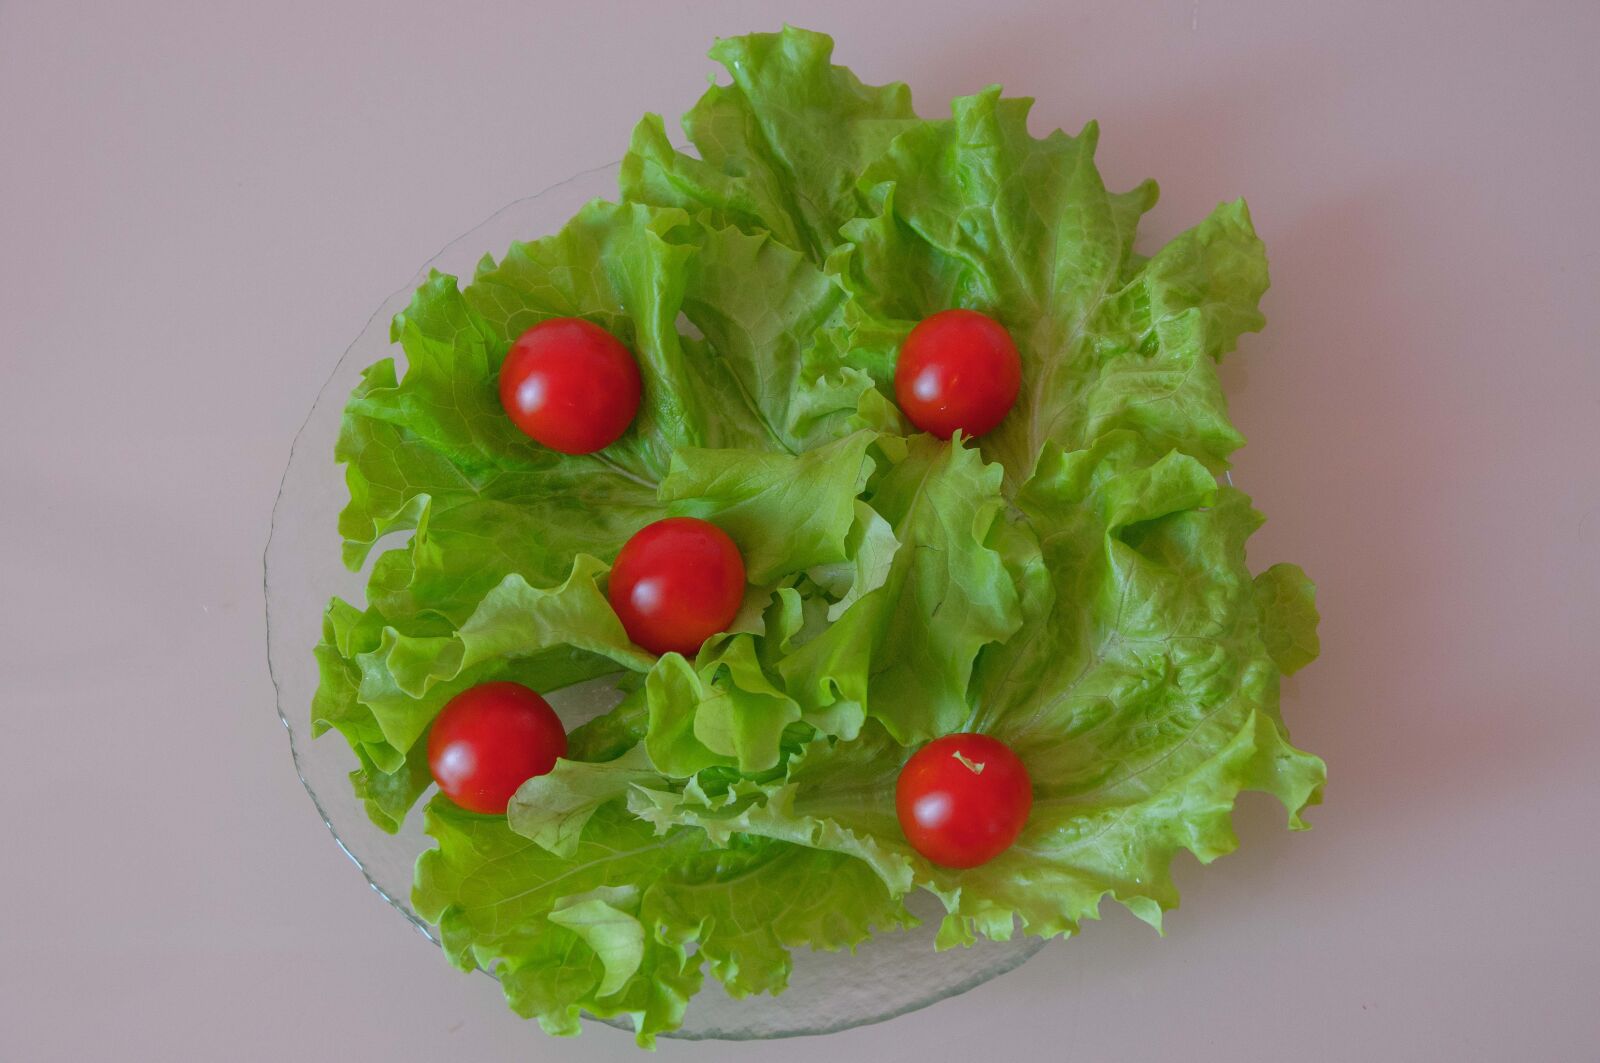 Sony SLT-A57 sample photo. Salad, leaves, tomatoes photography